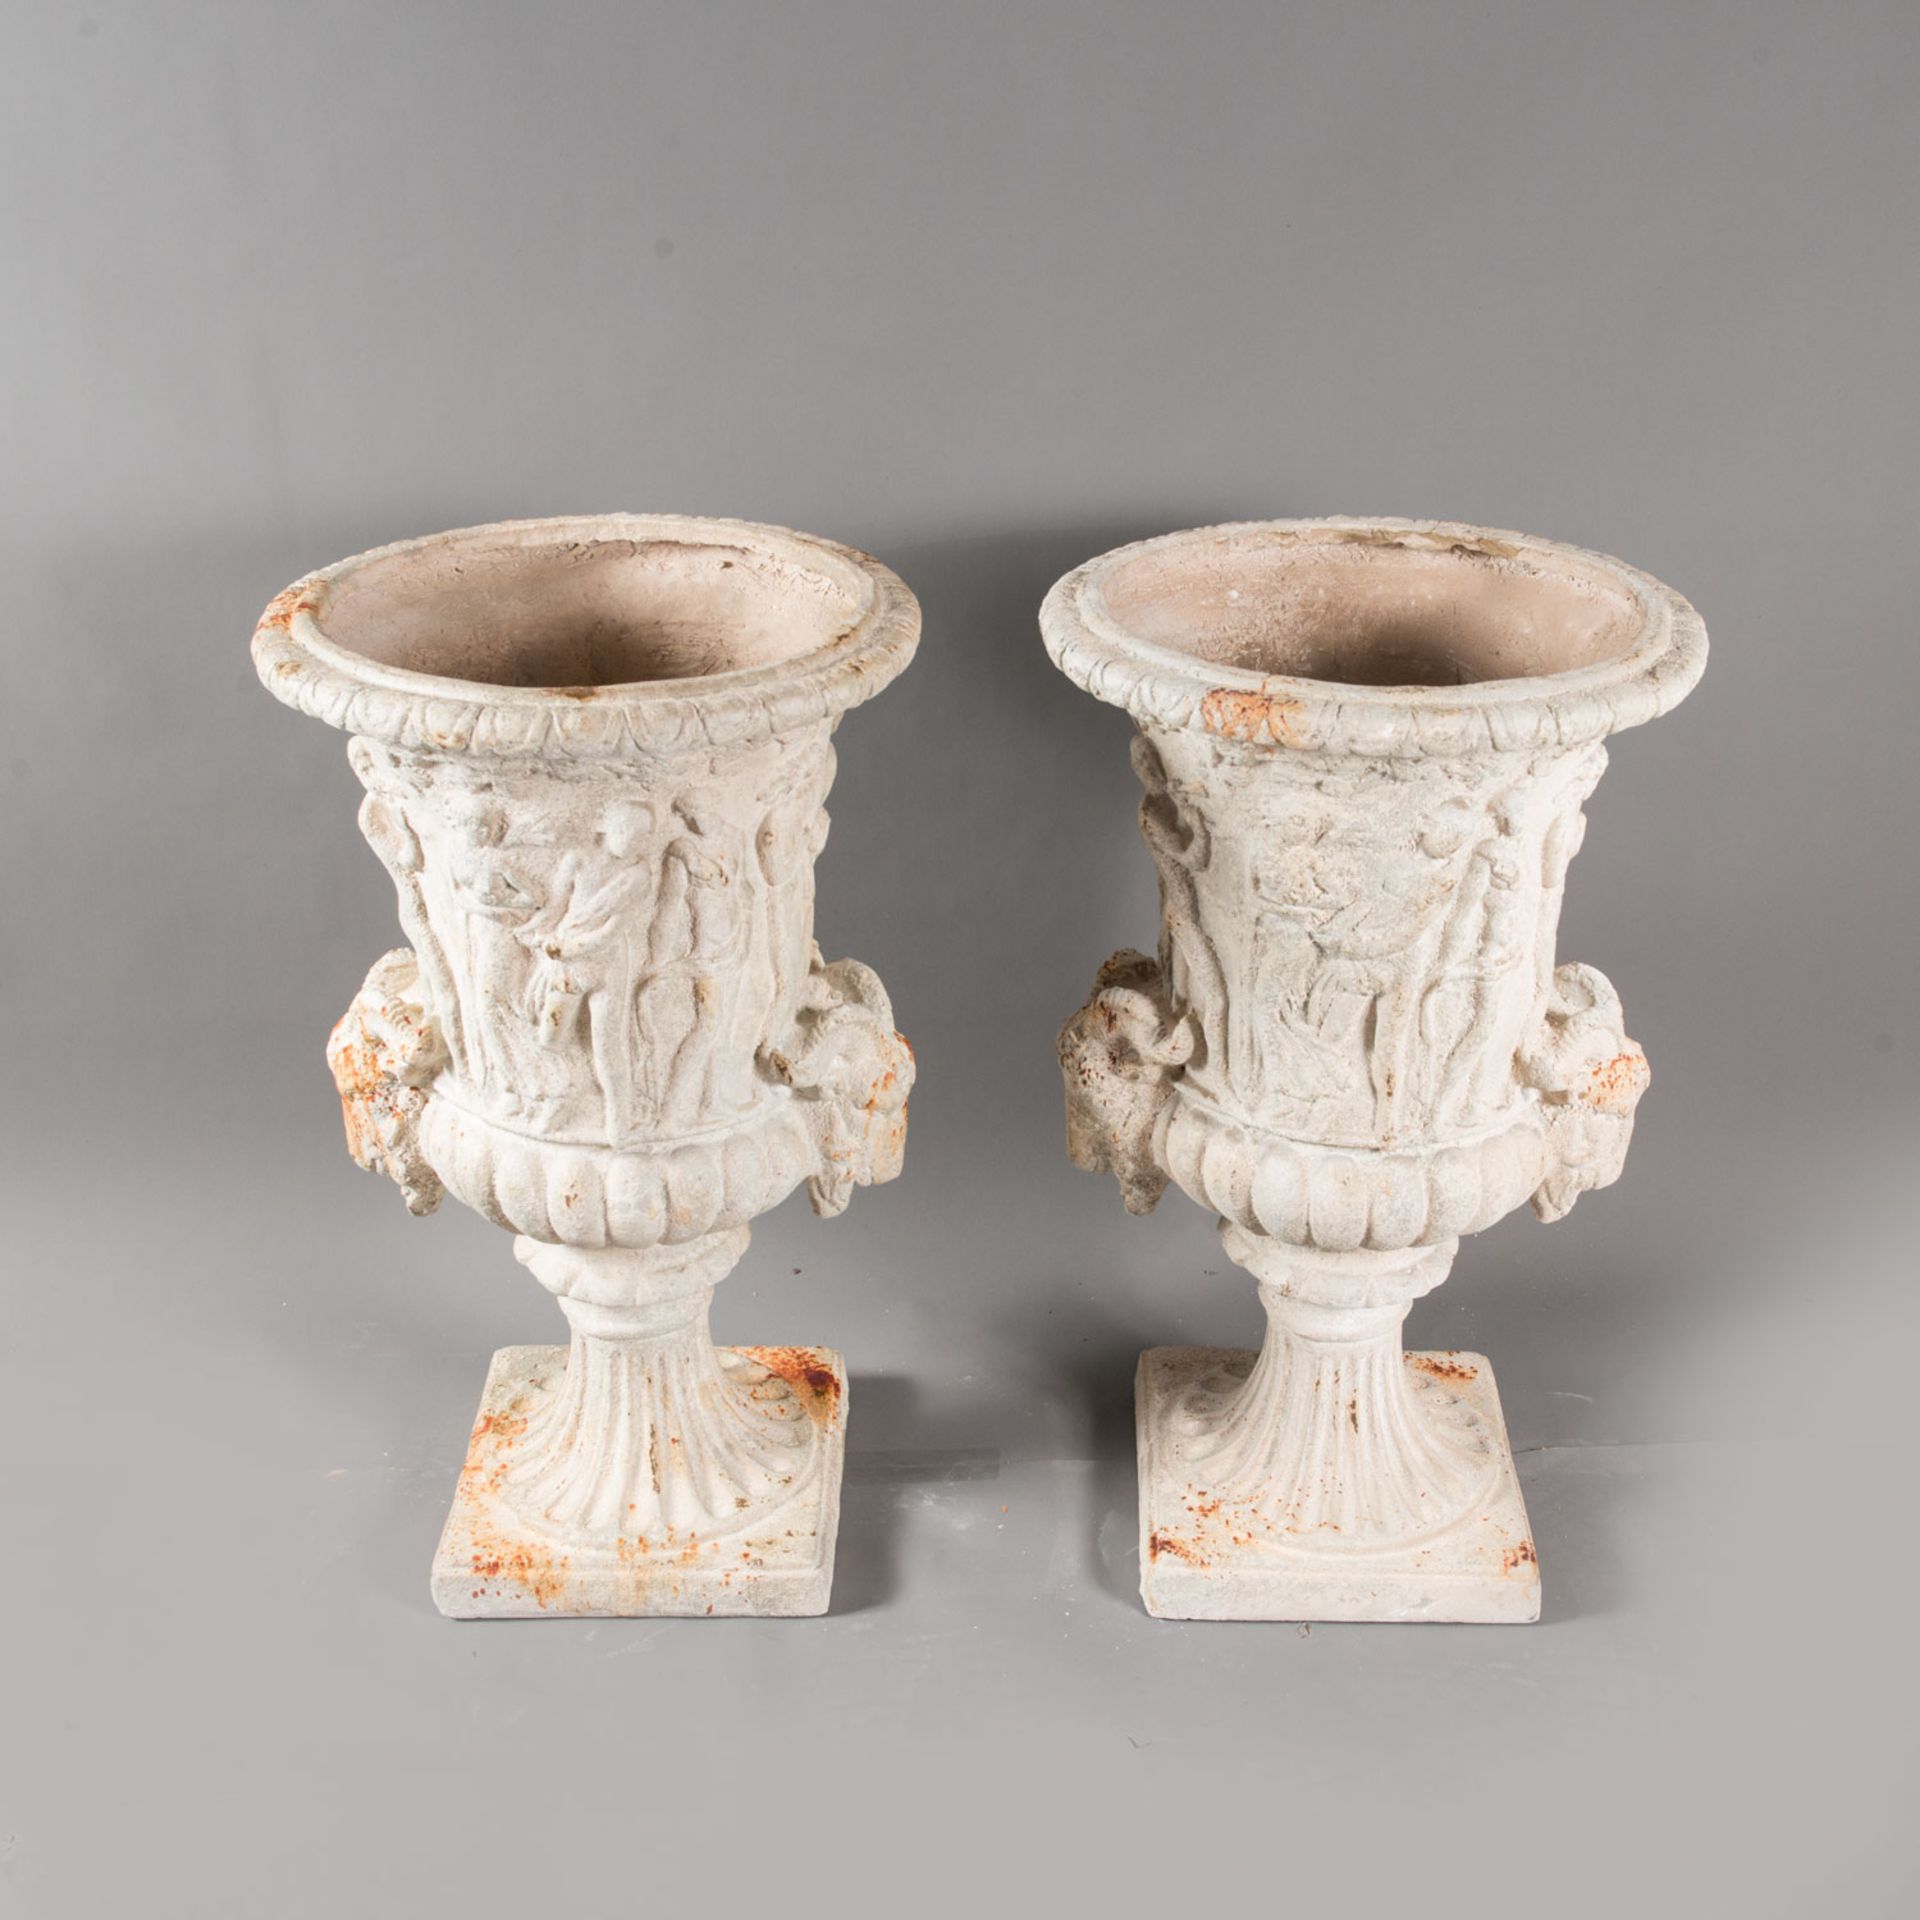 Pair of classical garden urns - Image 2 of 3